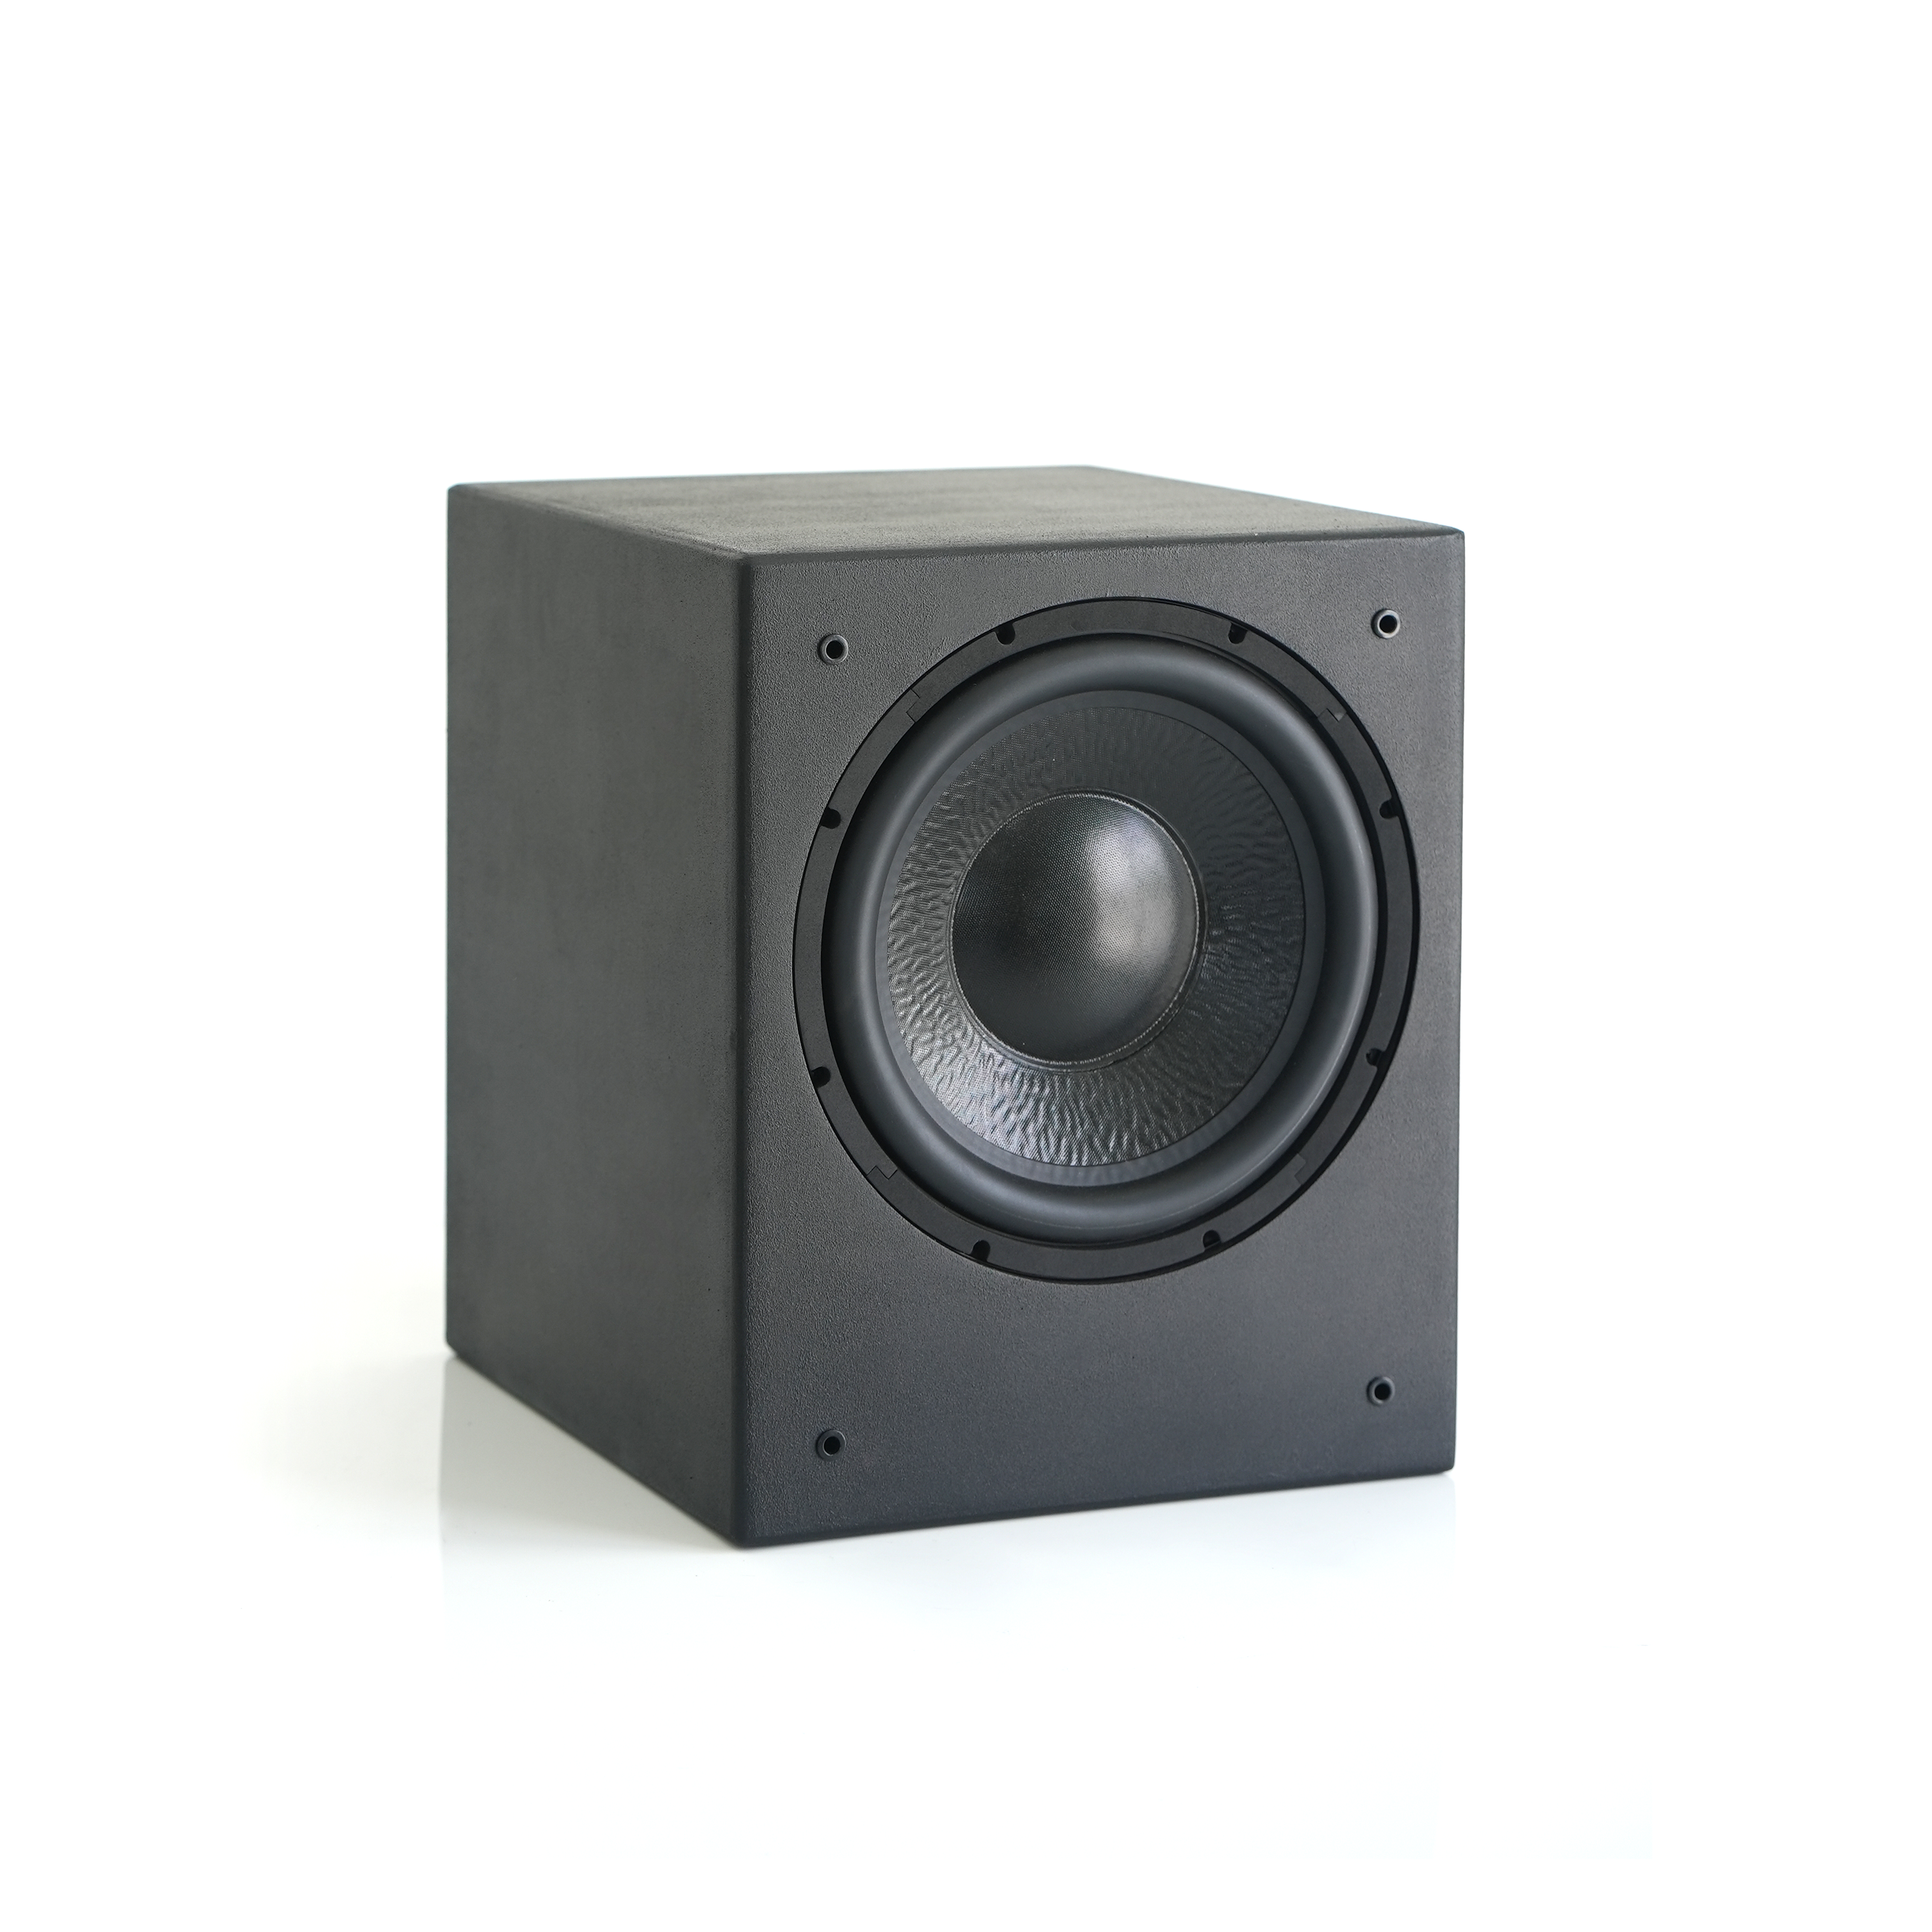 Onyx S12 Active Subwoofer